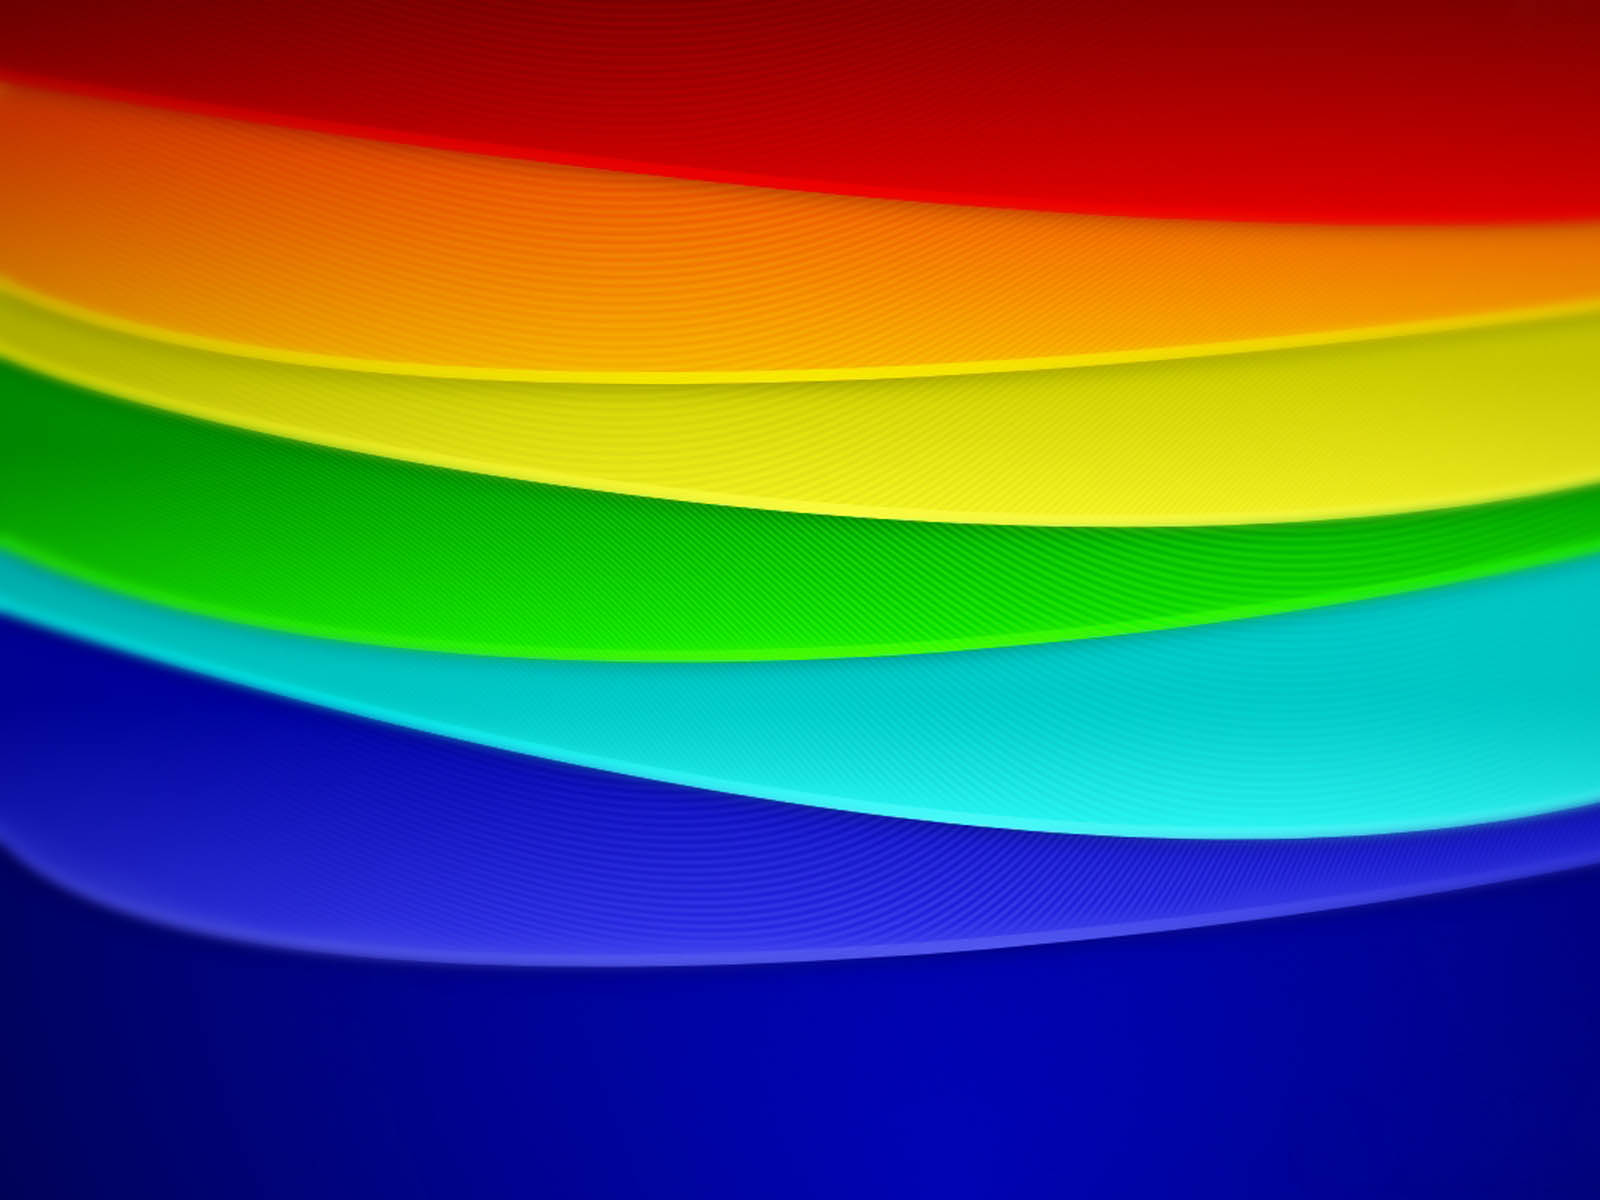 Rainbow Wallpaper 4k Colorful Background Free Download Rainbow Abstract  Background Download Wallpapers Colorful Twirl Background 4k Creative  Vortex Rainbow Backgrounds Colo Colorful Rainbow Background Vector  Illustration Rainbow Background Rainbow 